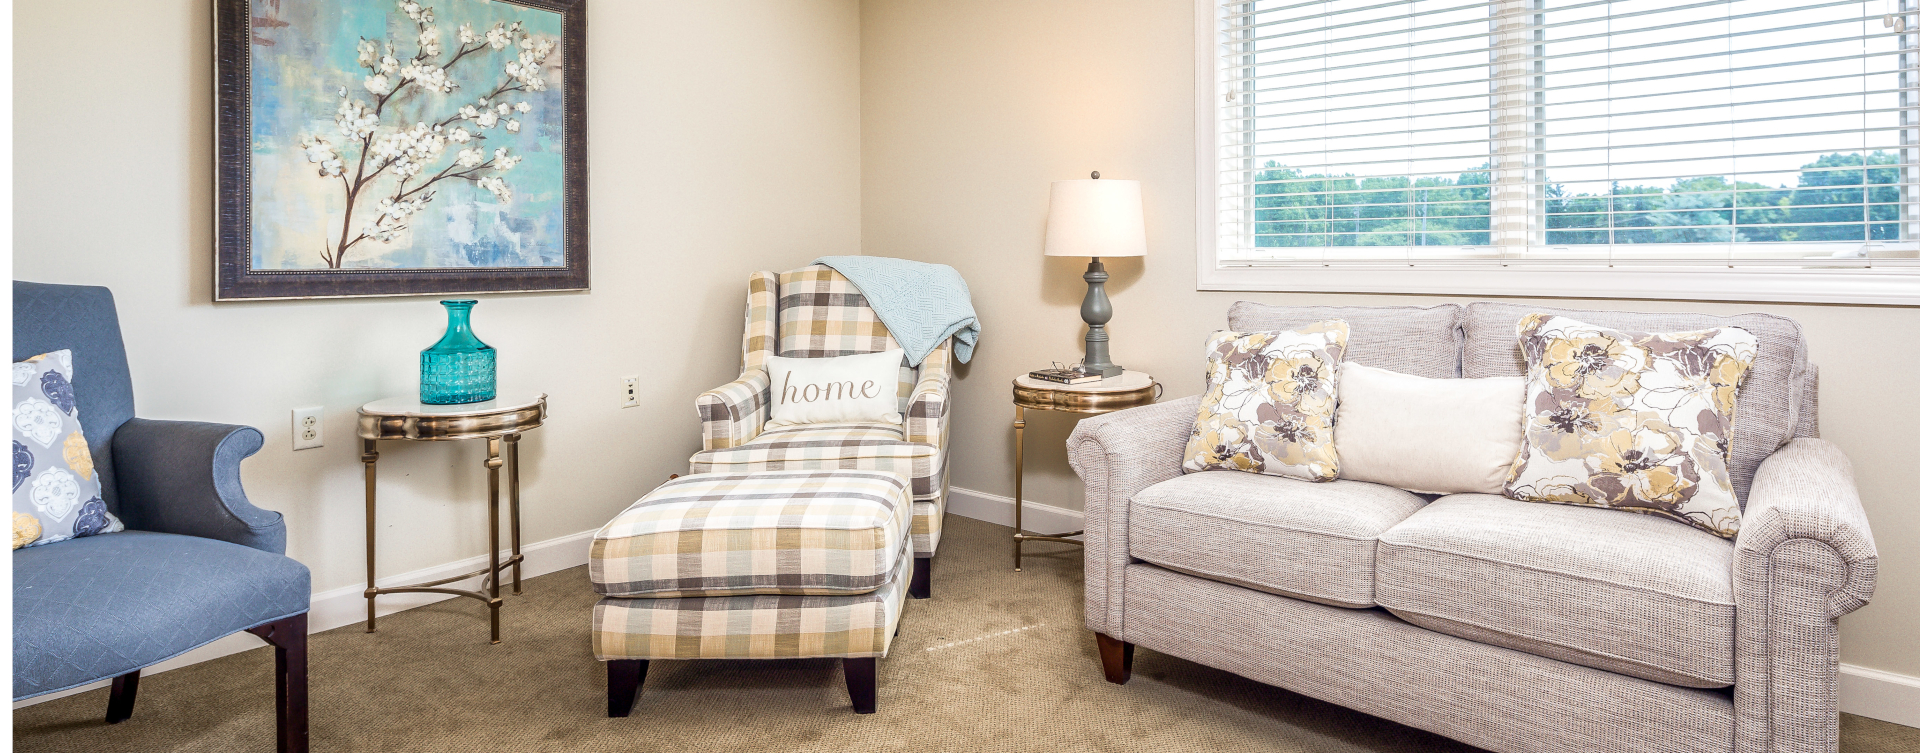 Get a new lease on life with a cozy apartment at Bickford of West Lansing